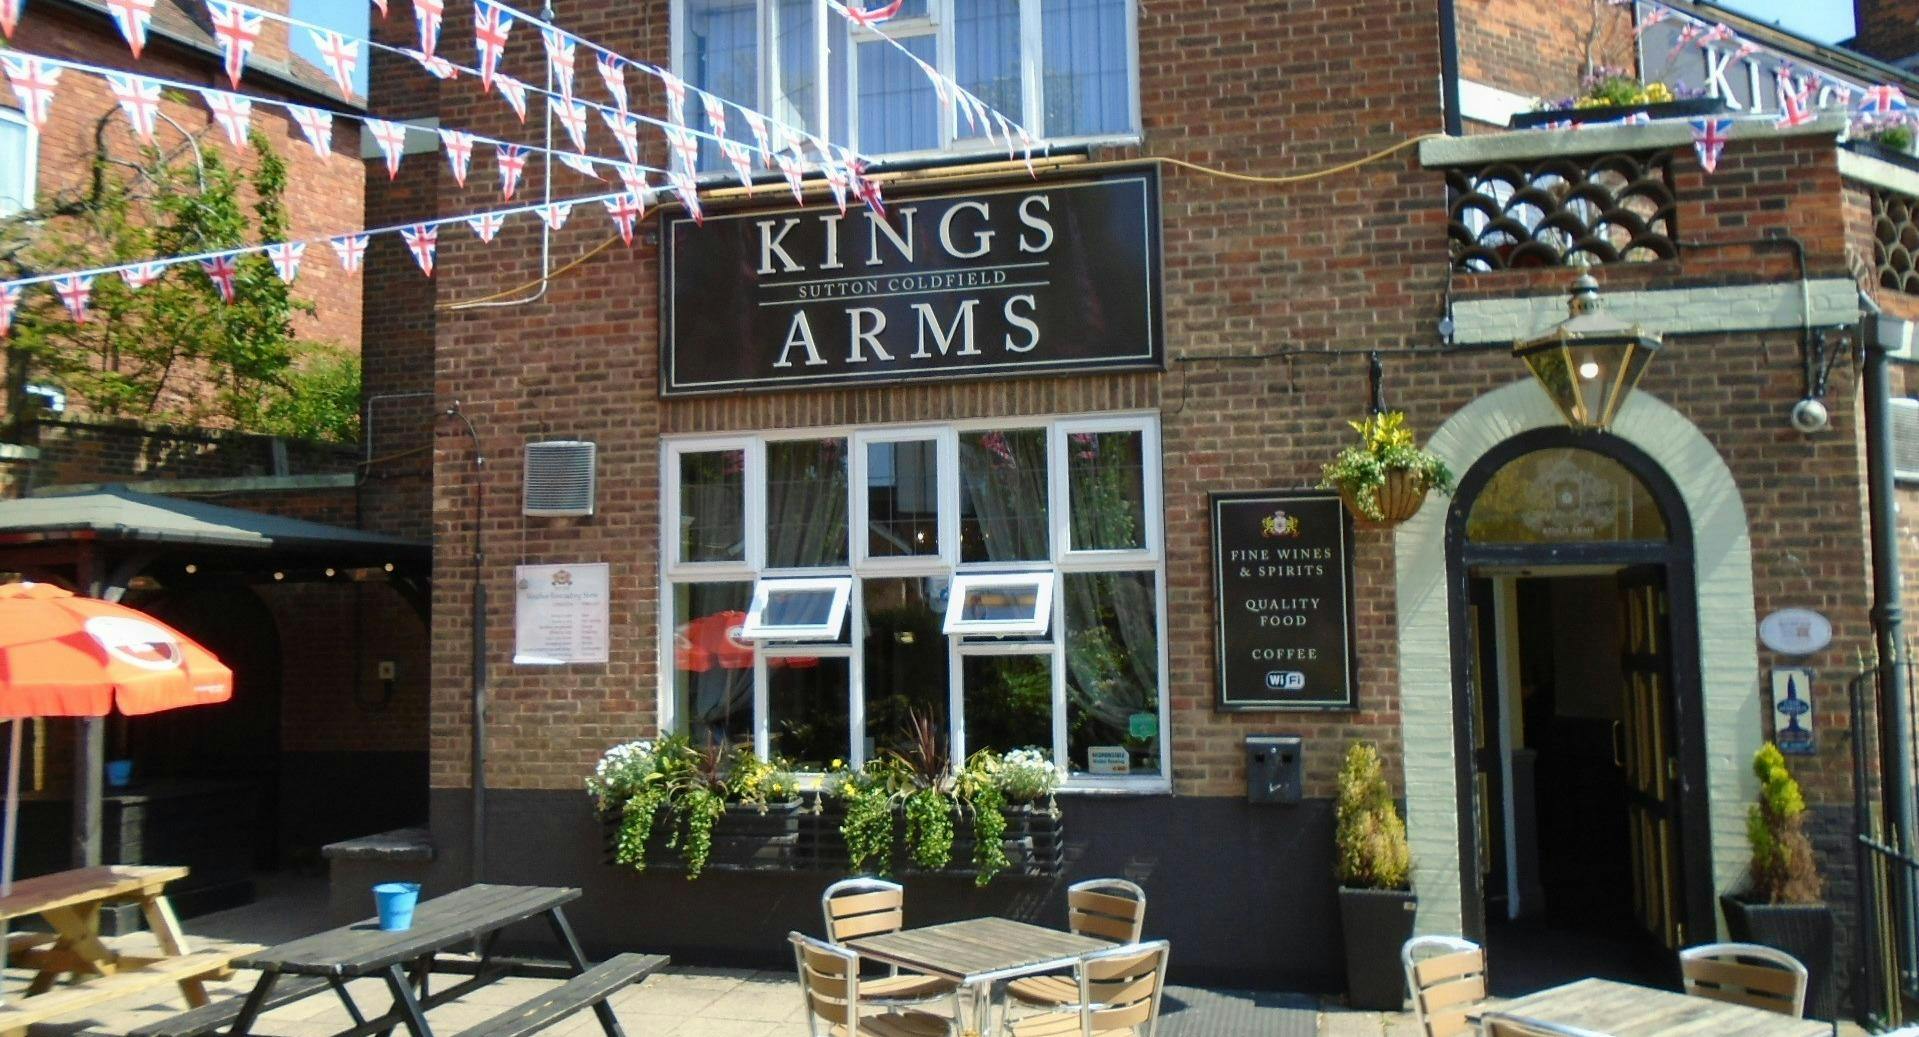 Photo of restaurant Kings Arms Sutton Coldfield in Sutton Coldfield, Birmingham